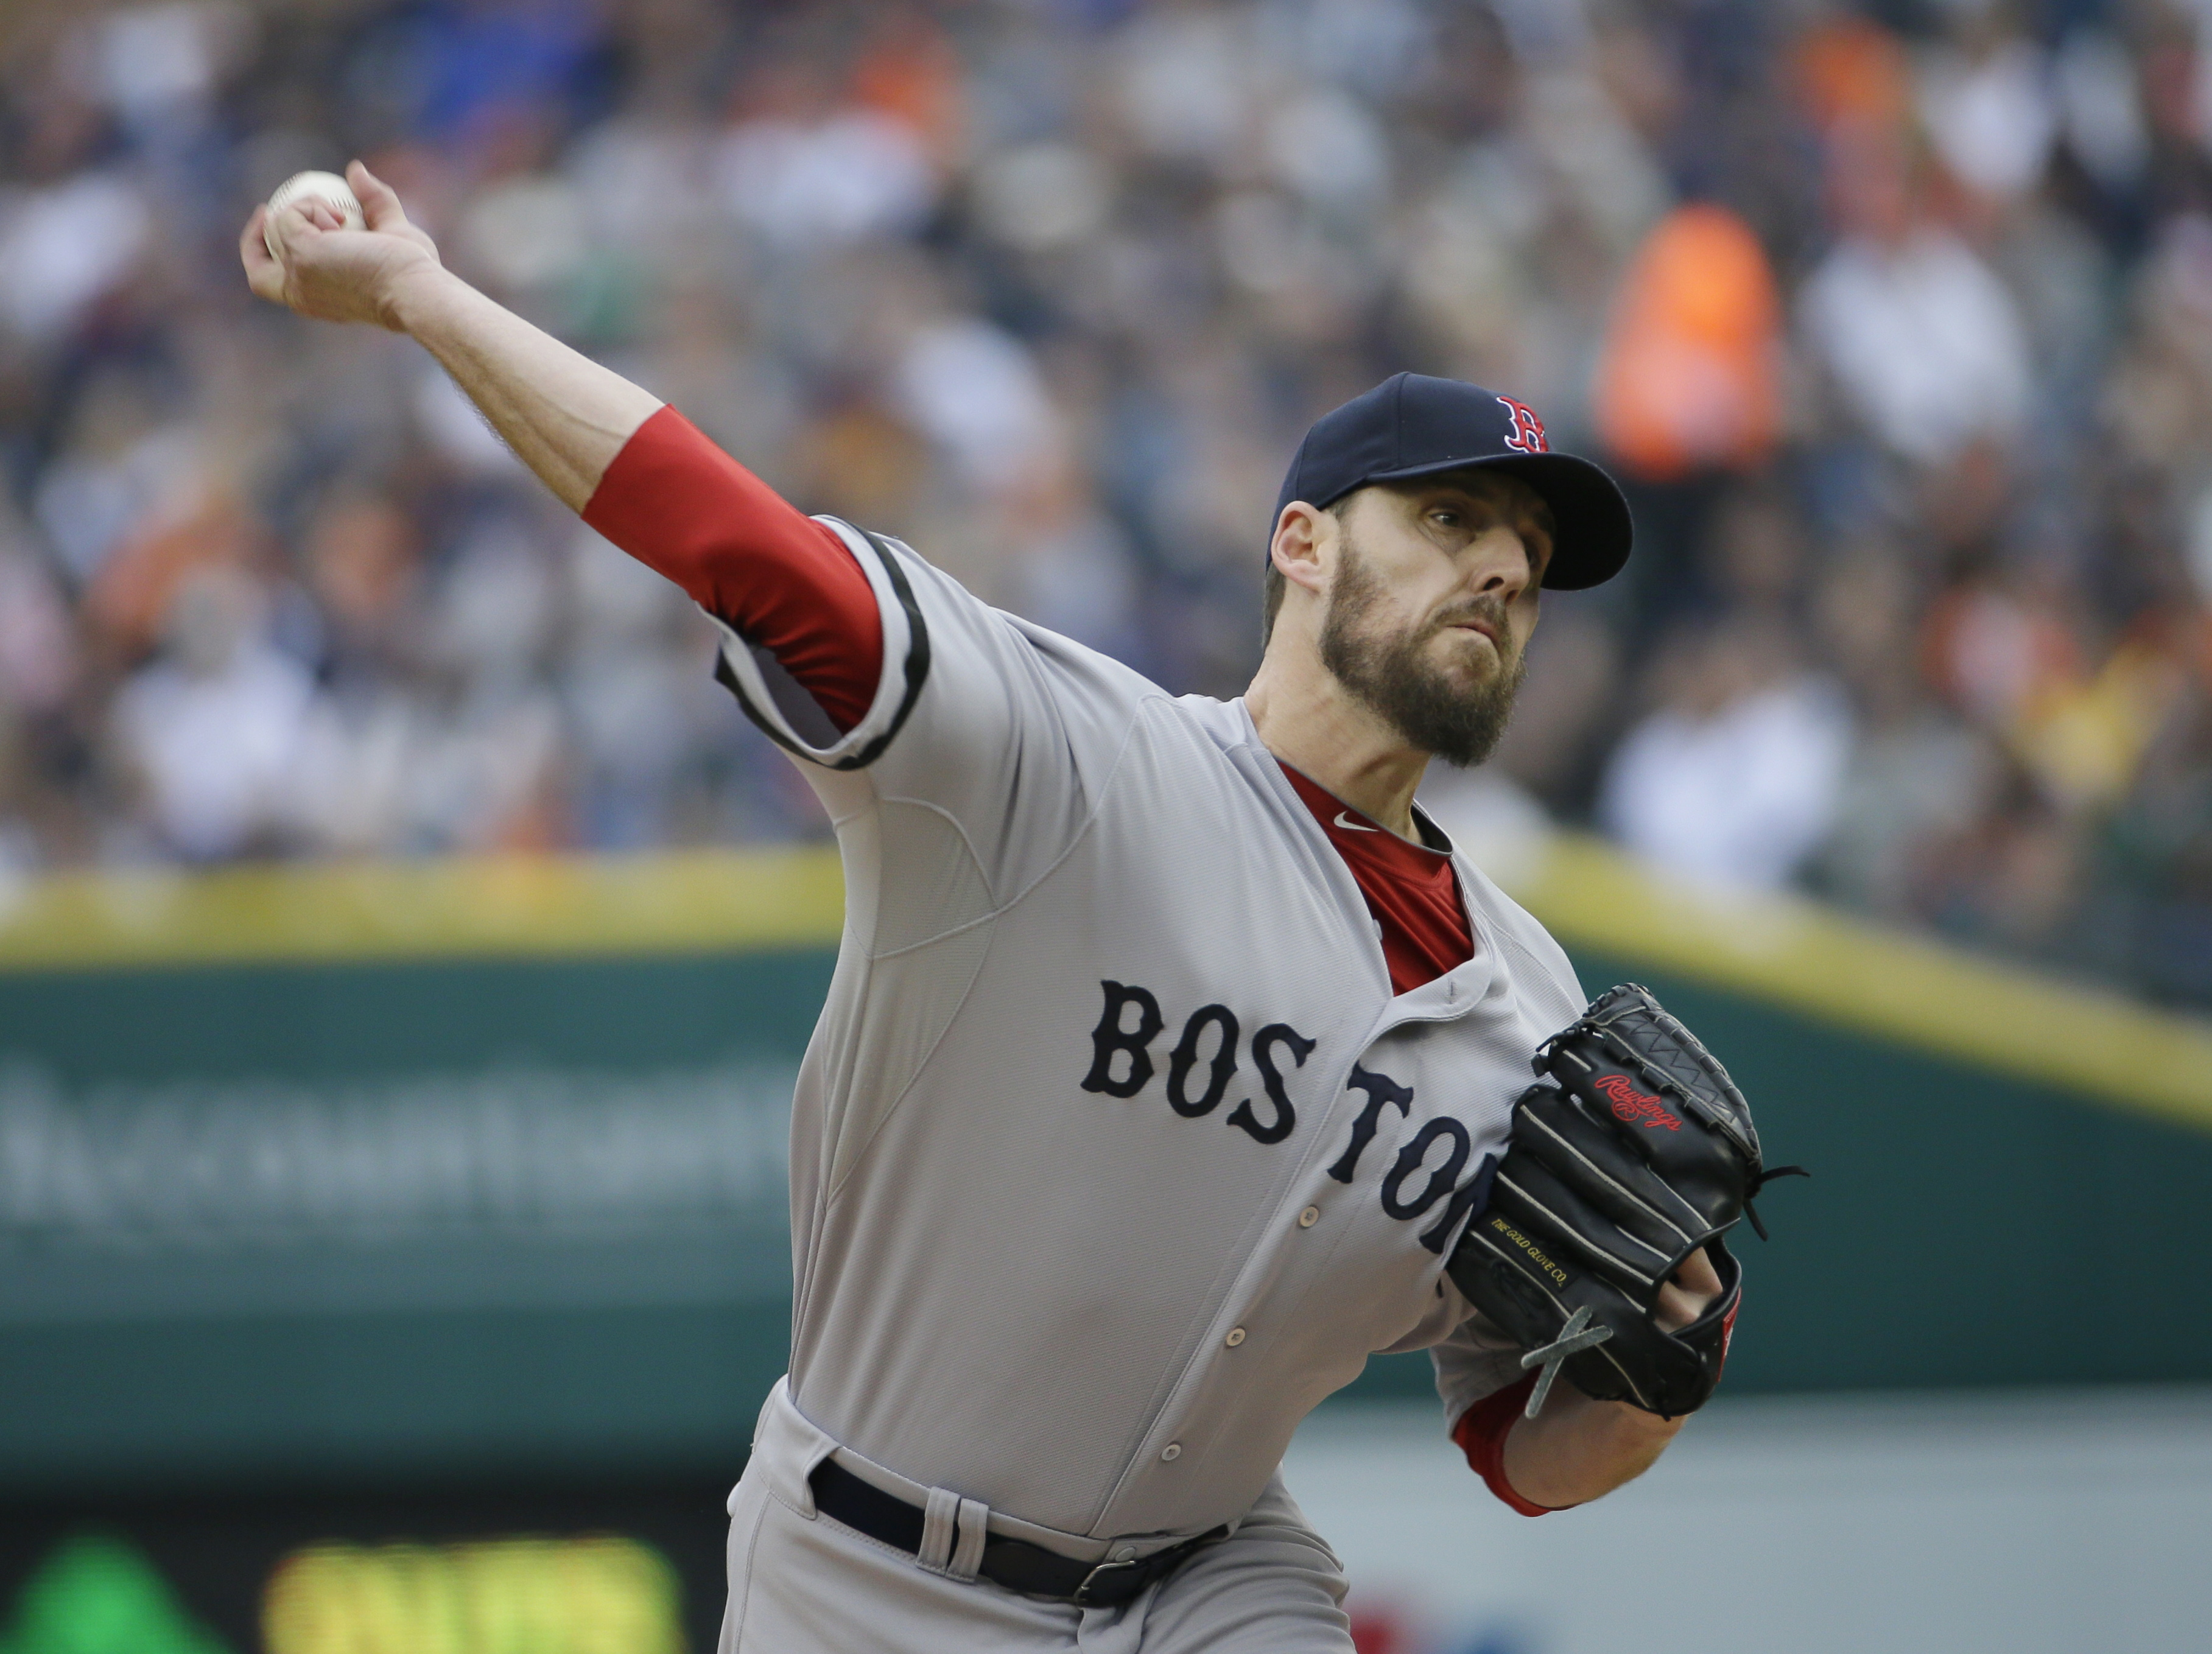 Red Sox give Boston something to cheer about - NZ Herald